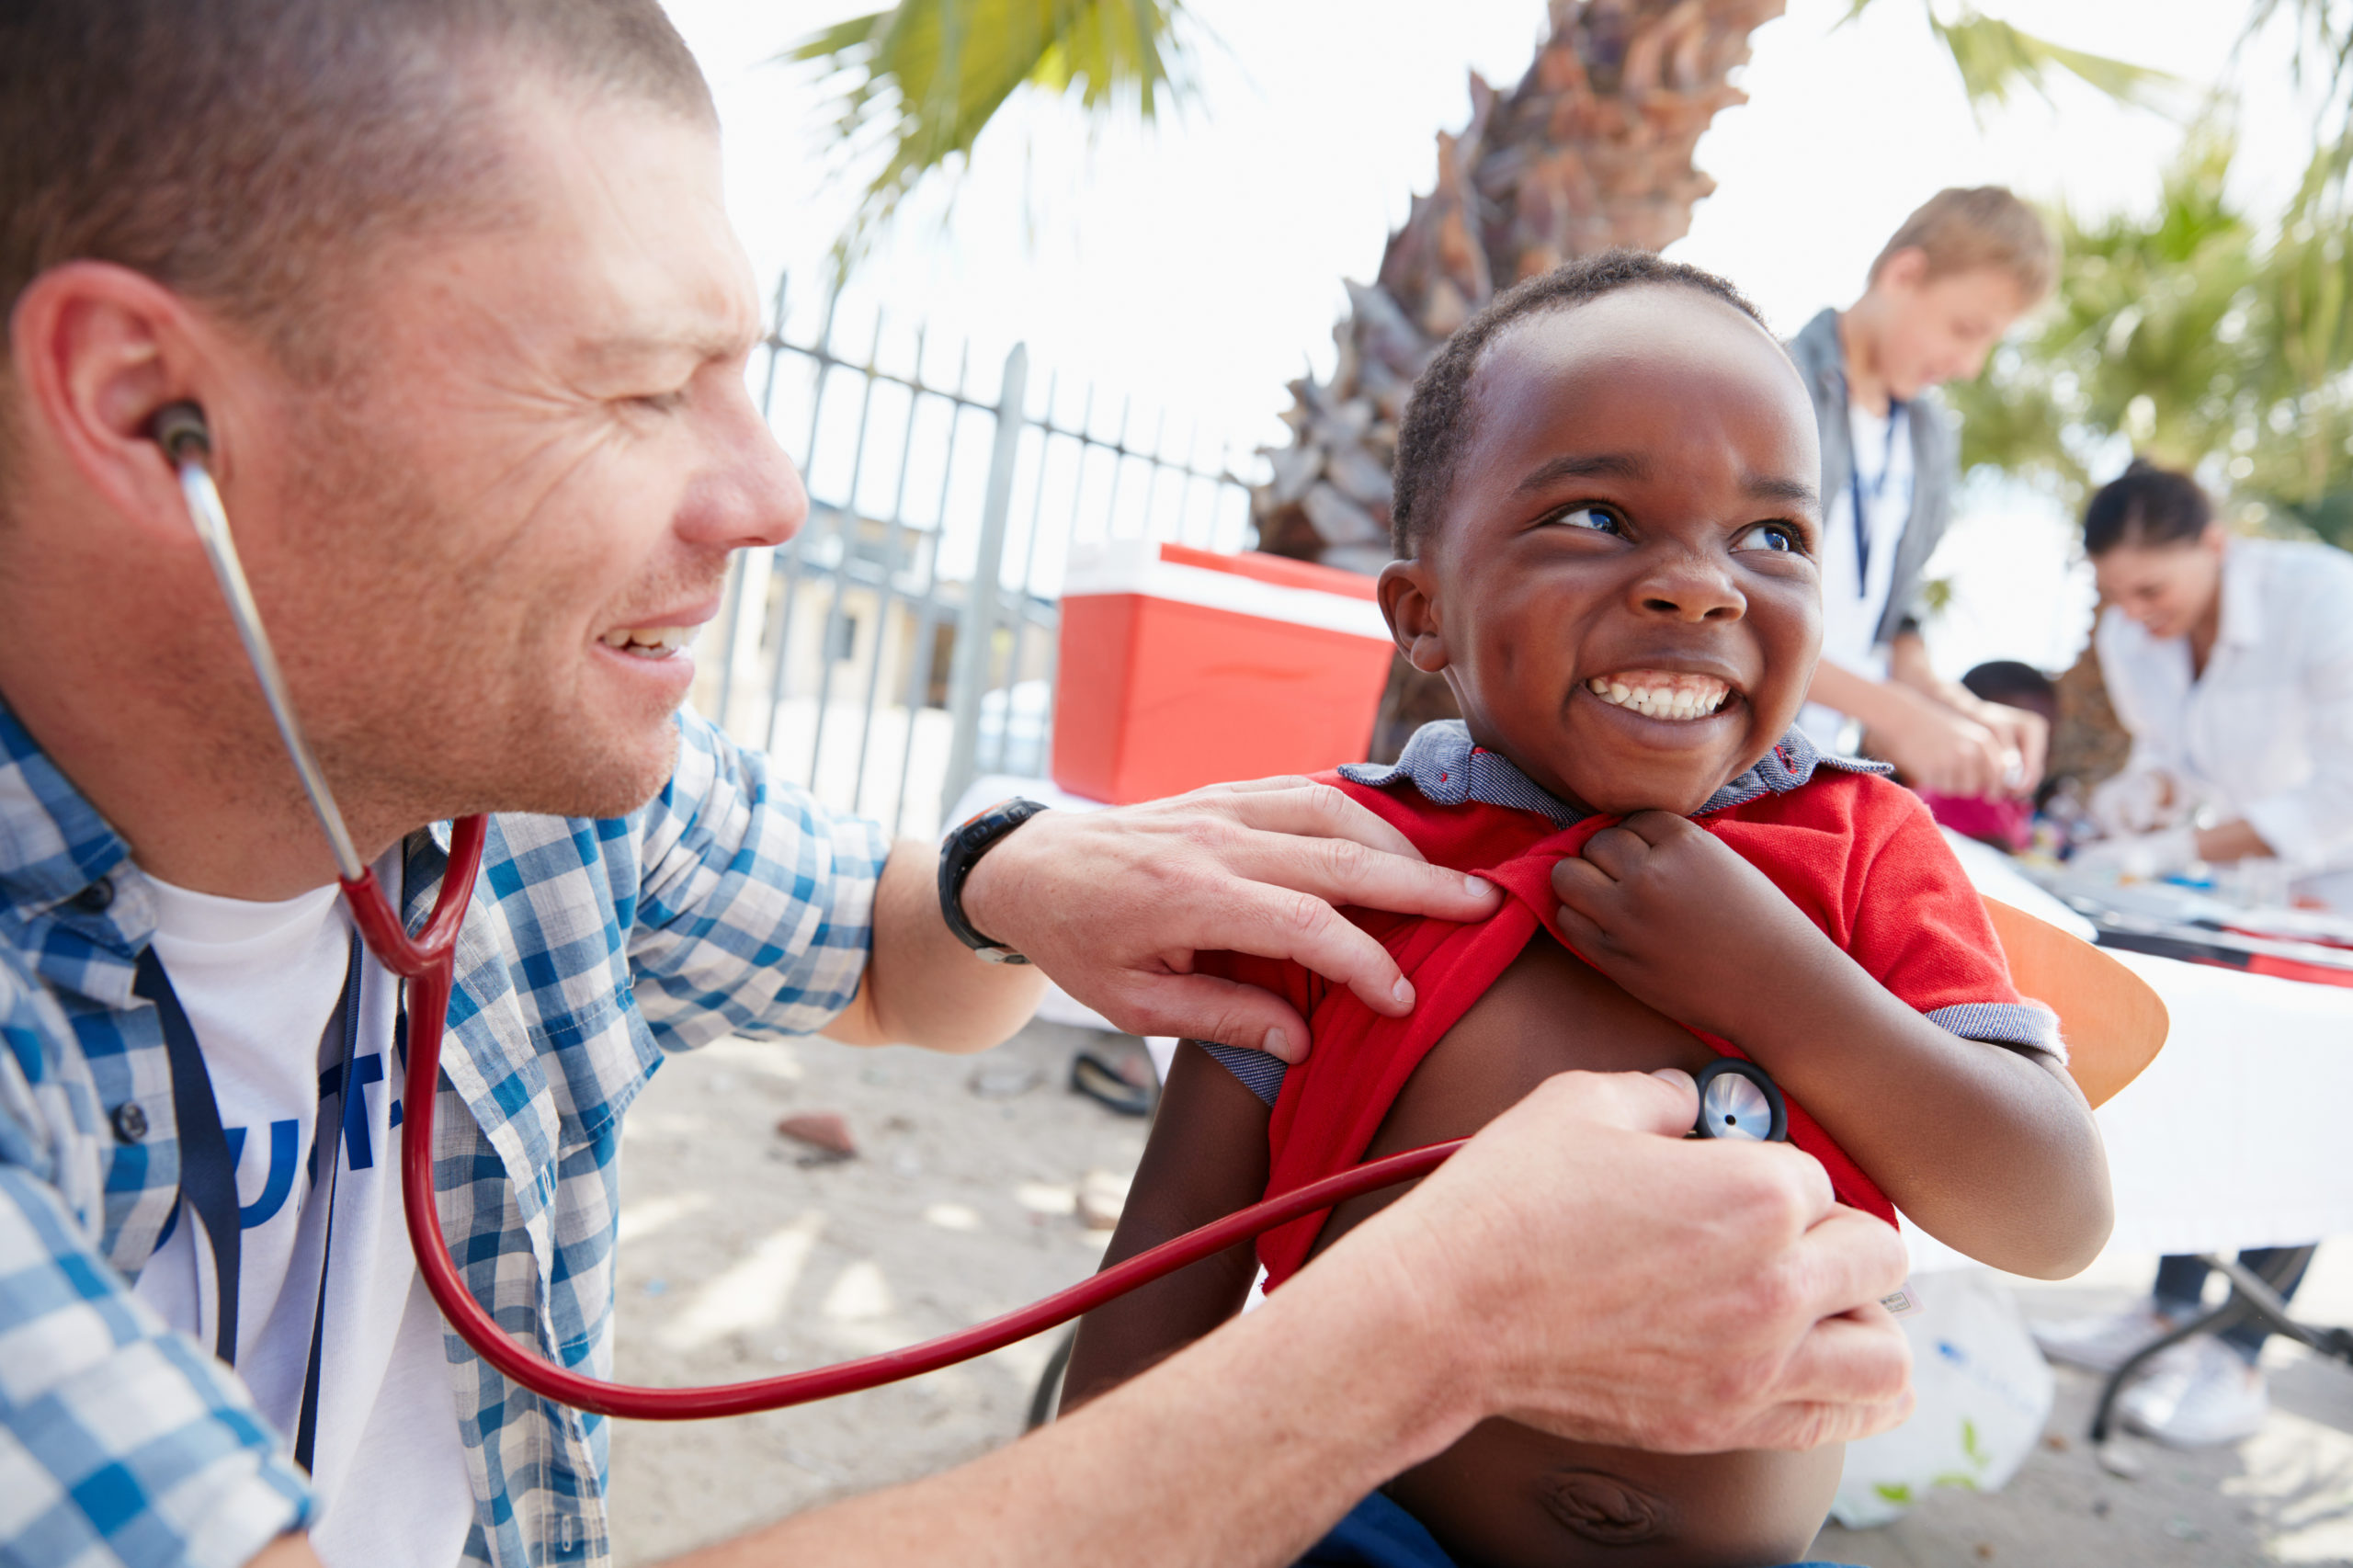 medical mission trip meaning